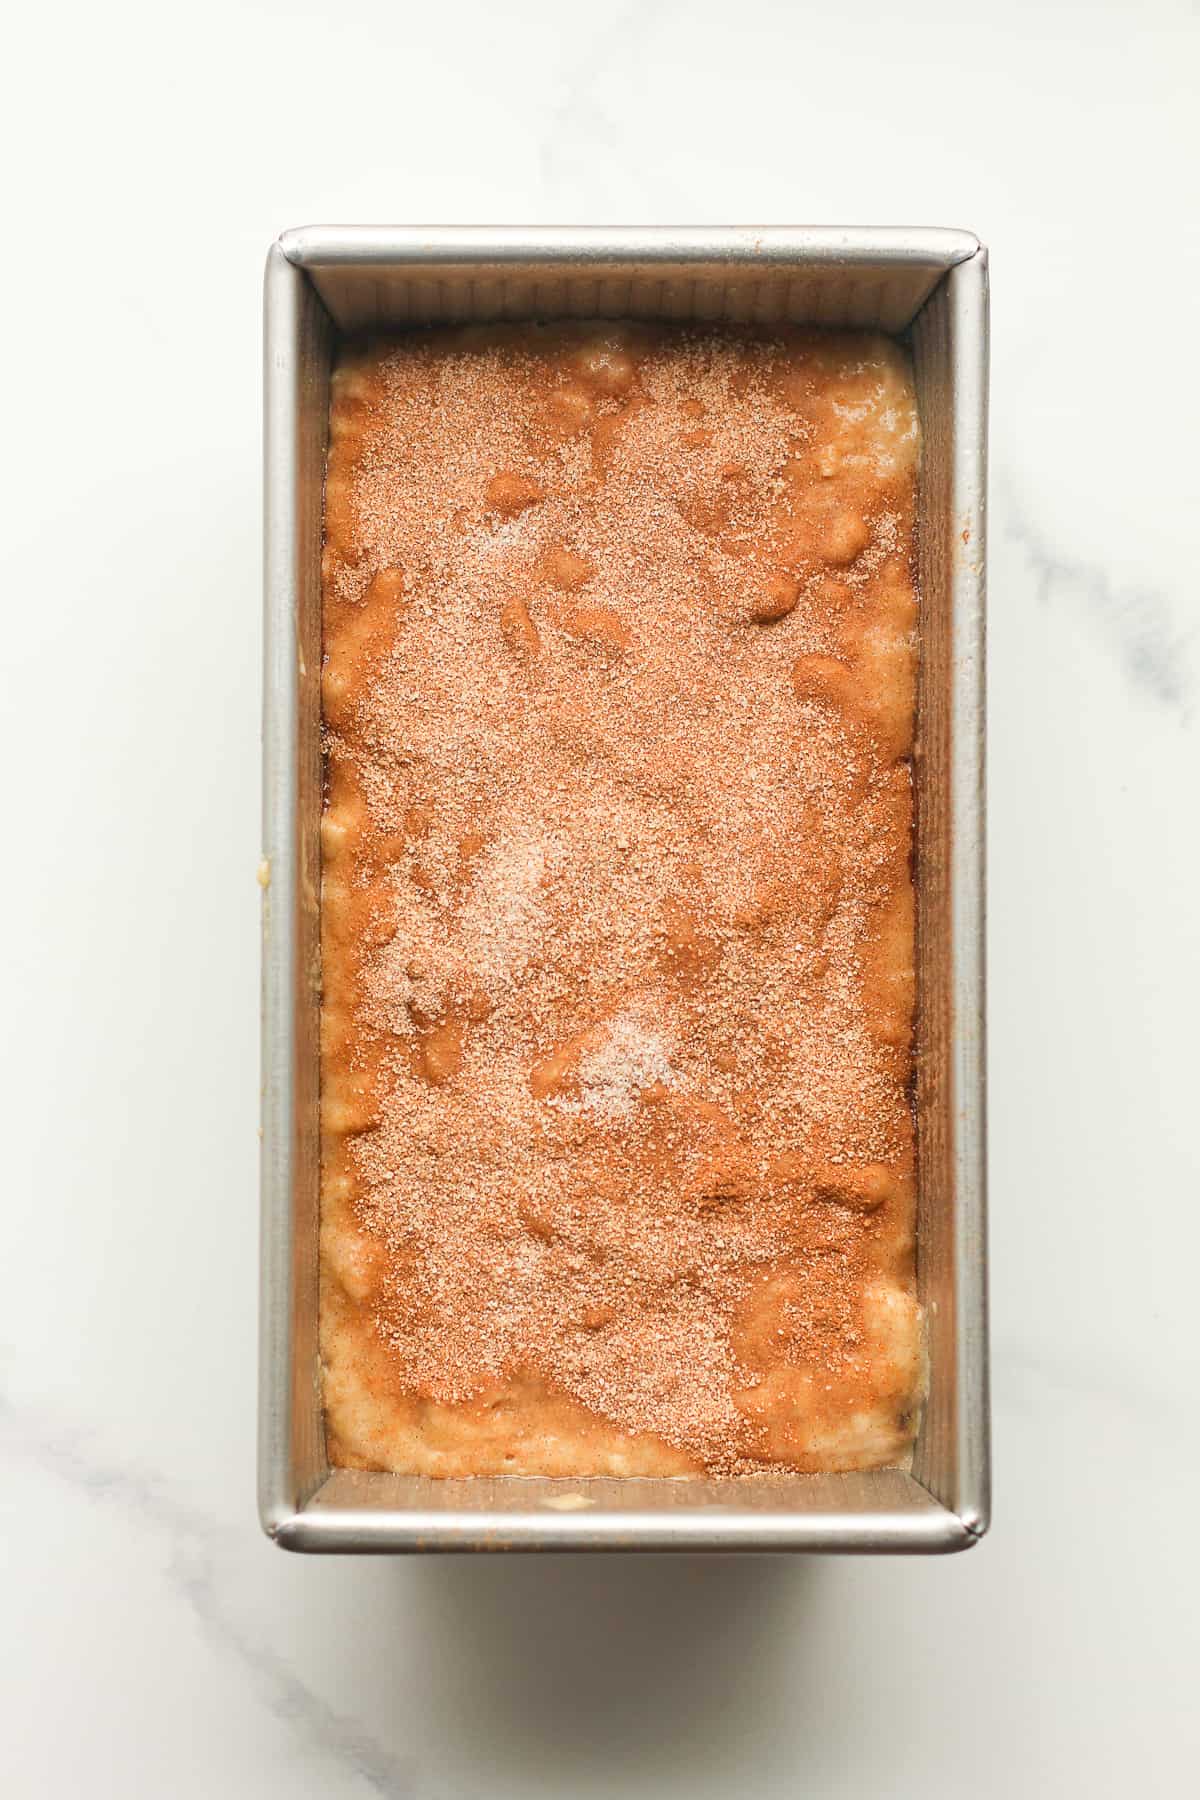 A loaf of the banana batter plus cinnamon mixture.